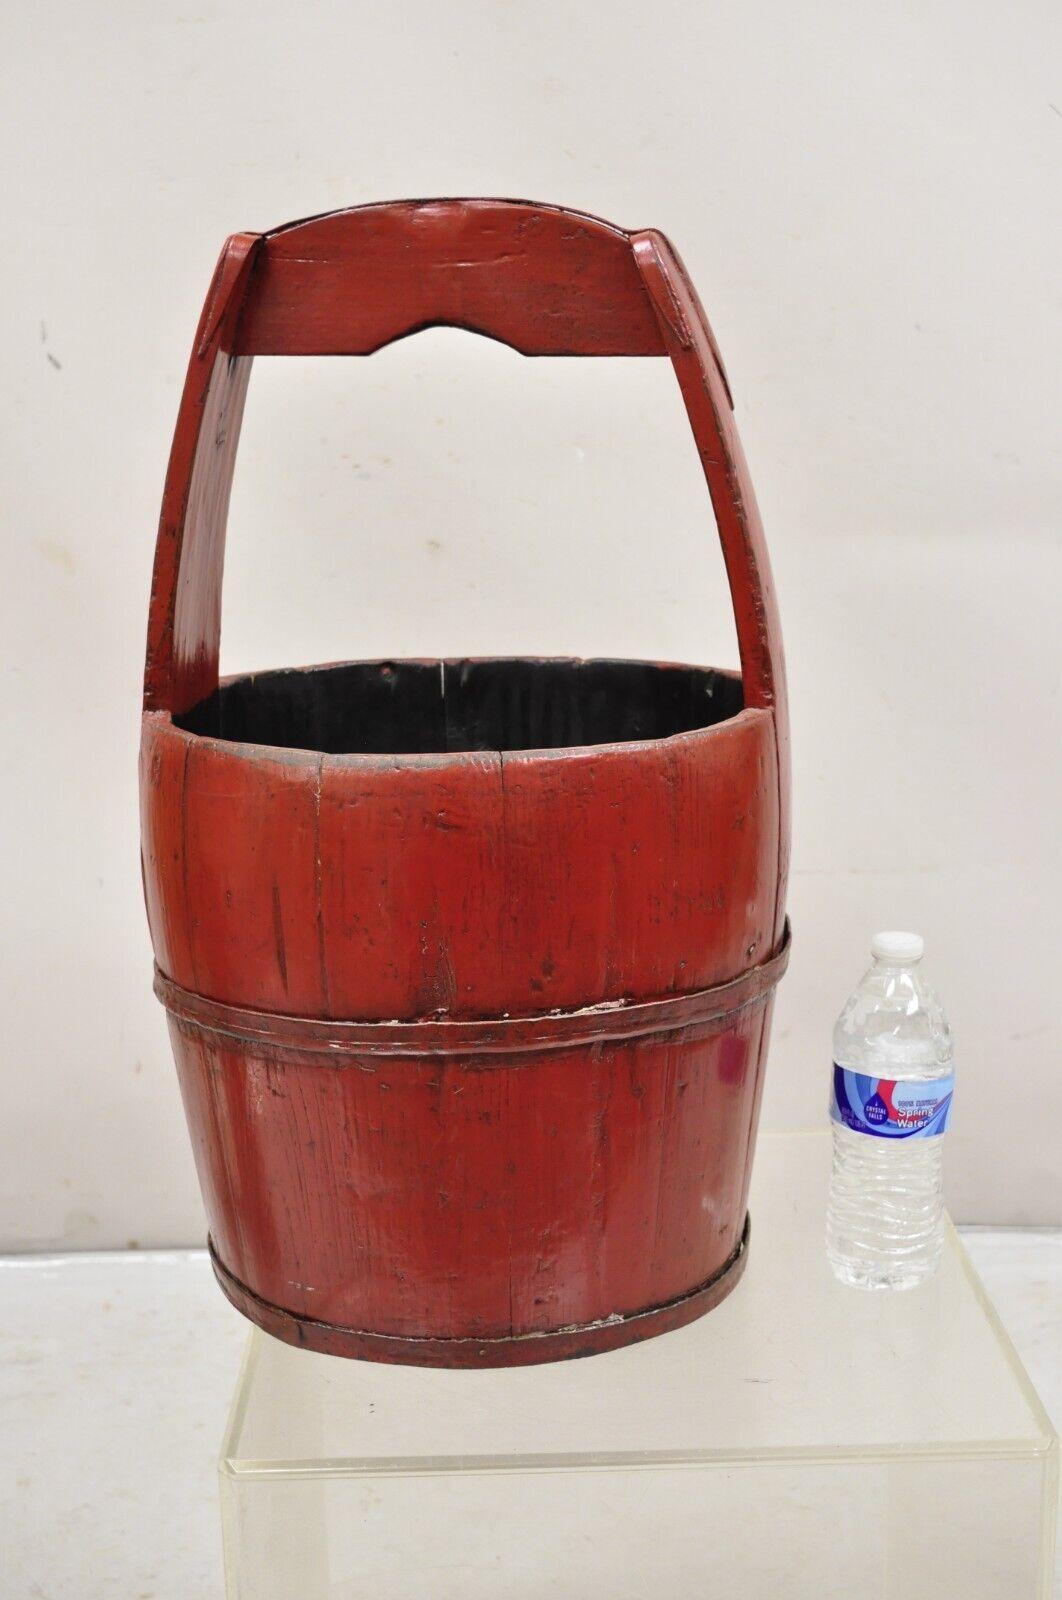 Vintage Rustic Primitive Chinese Wooden Red Painted Water Bucket with Handle. Circa Mid to Late 20th Century. Measurements: 23